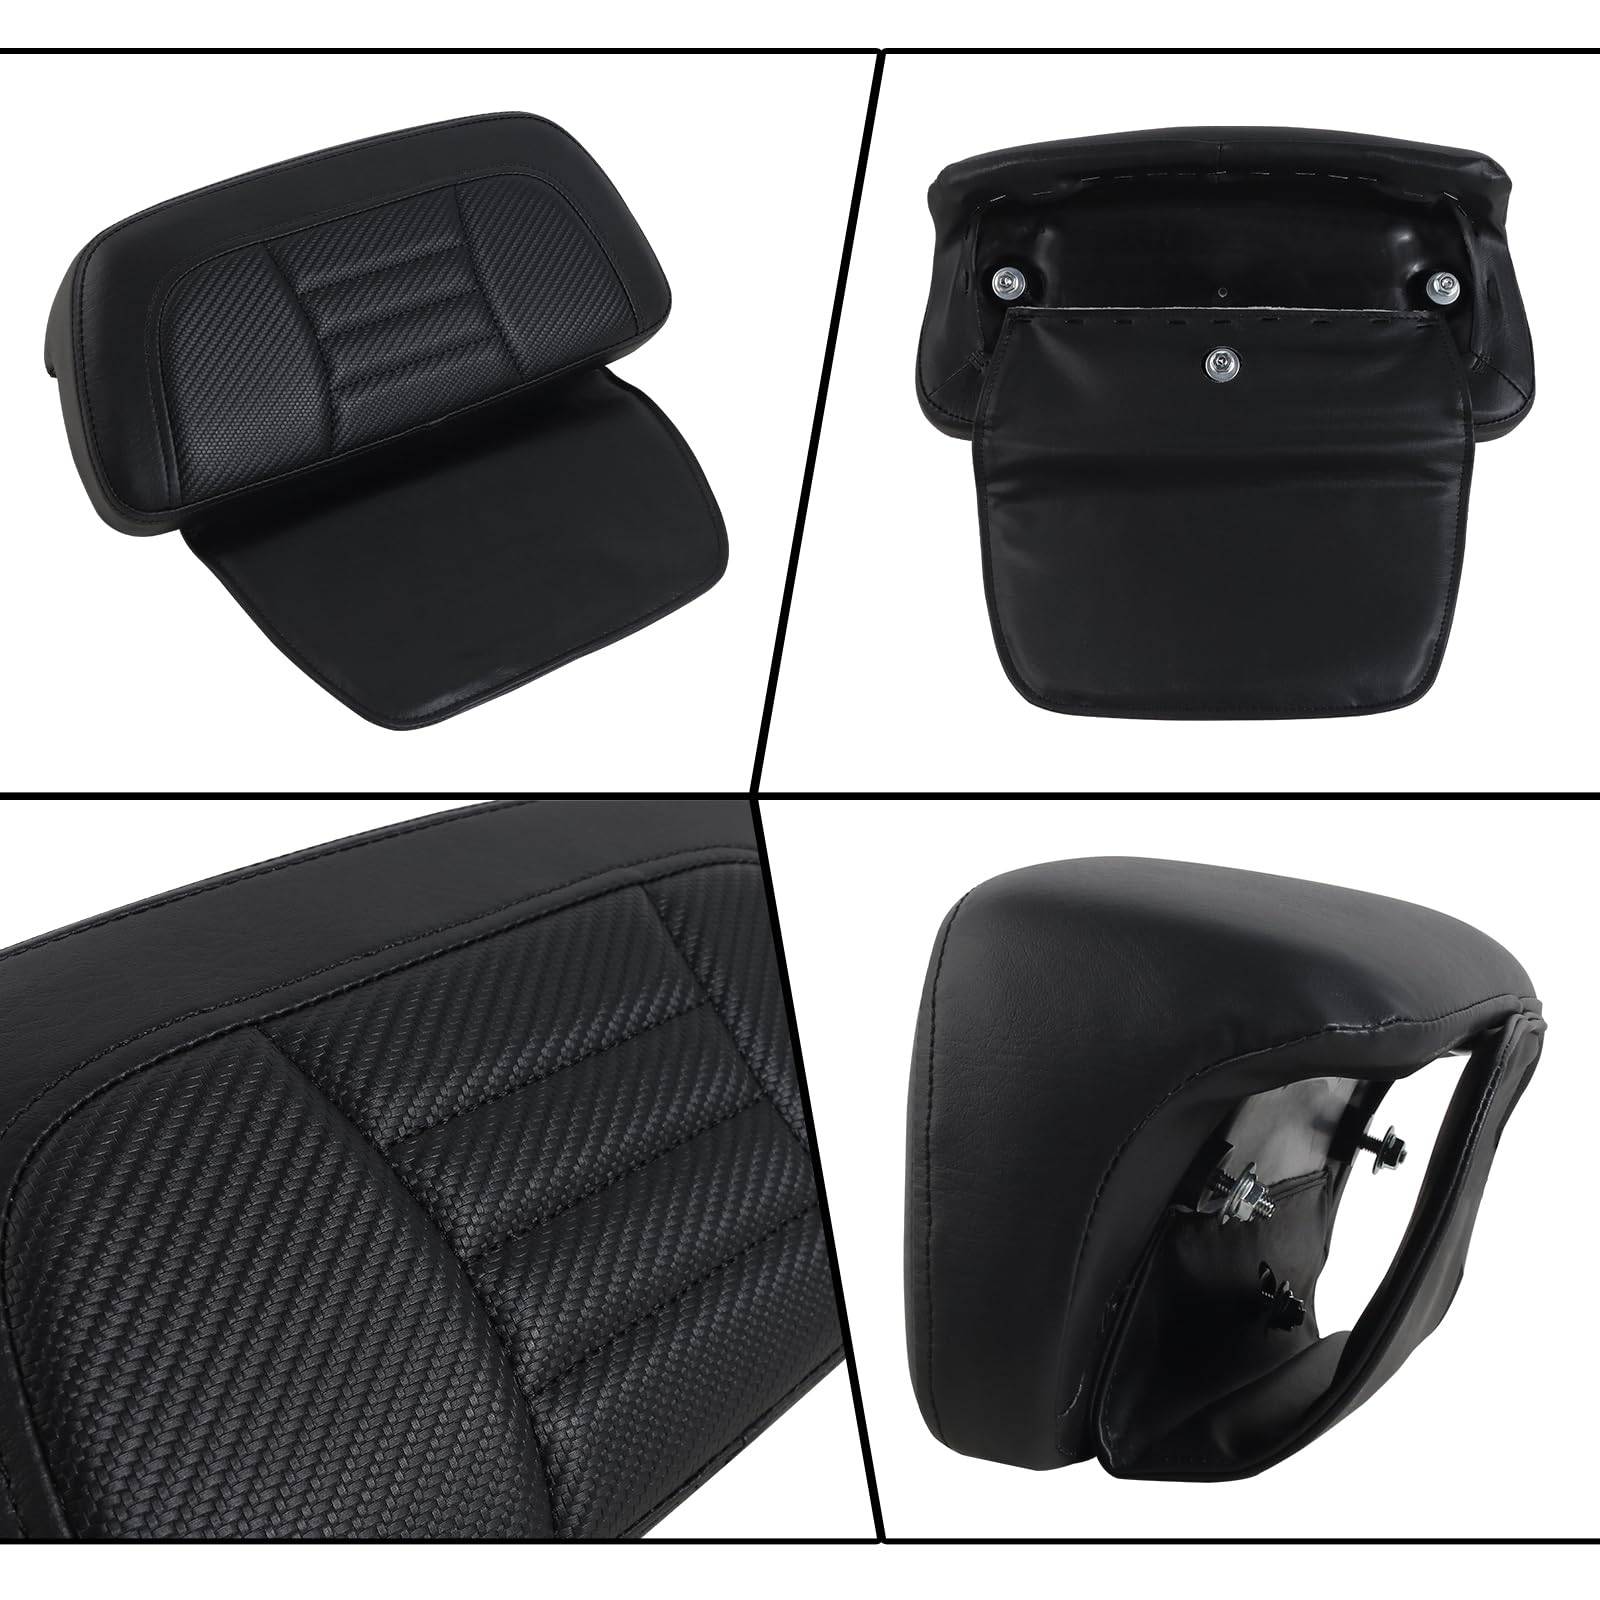 Backrest Pad, Stitching Backrest Cushion Pad for Harley Glide Road King Touring